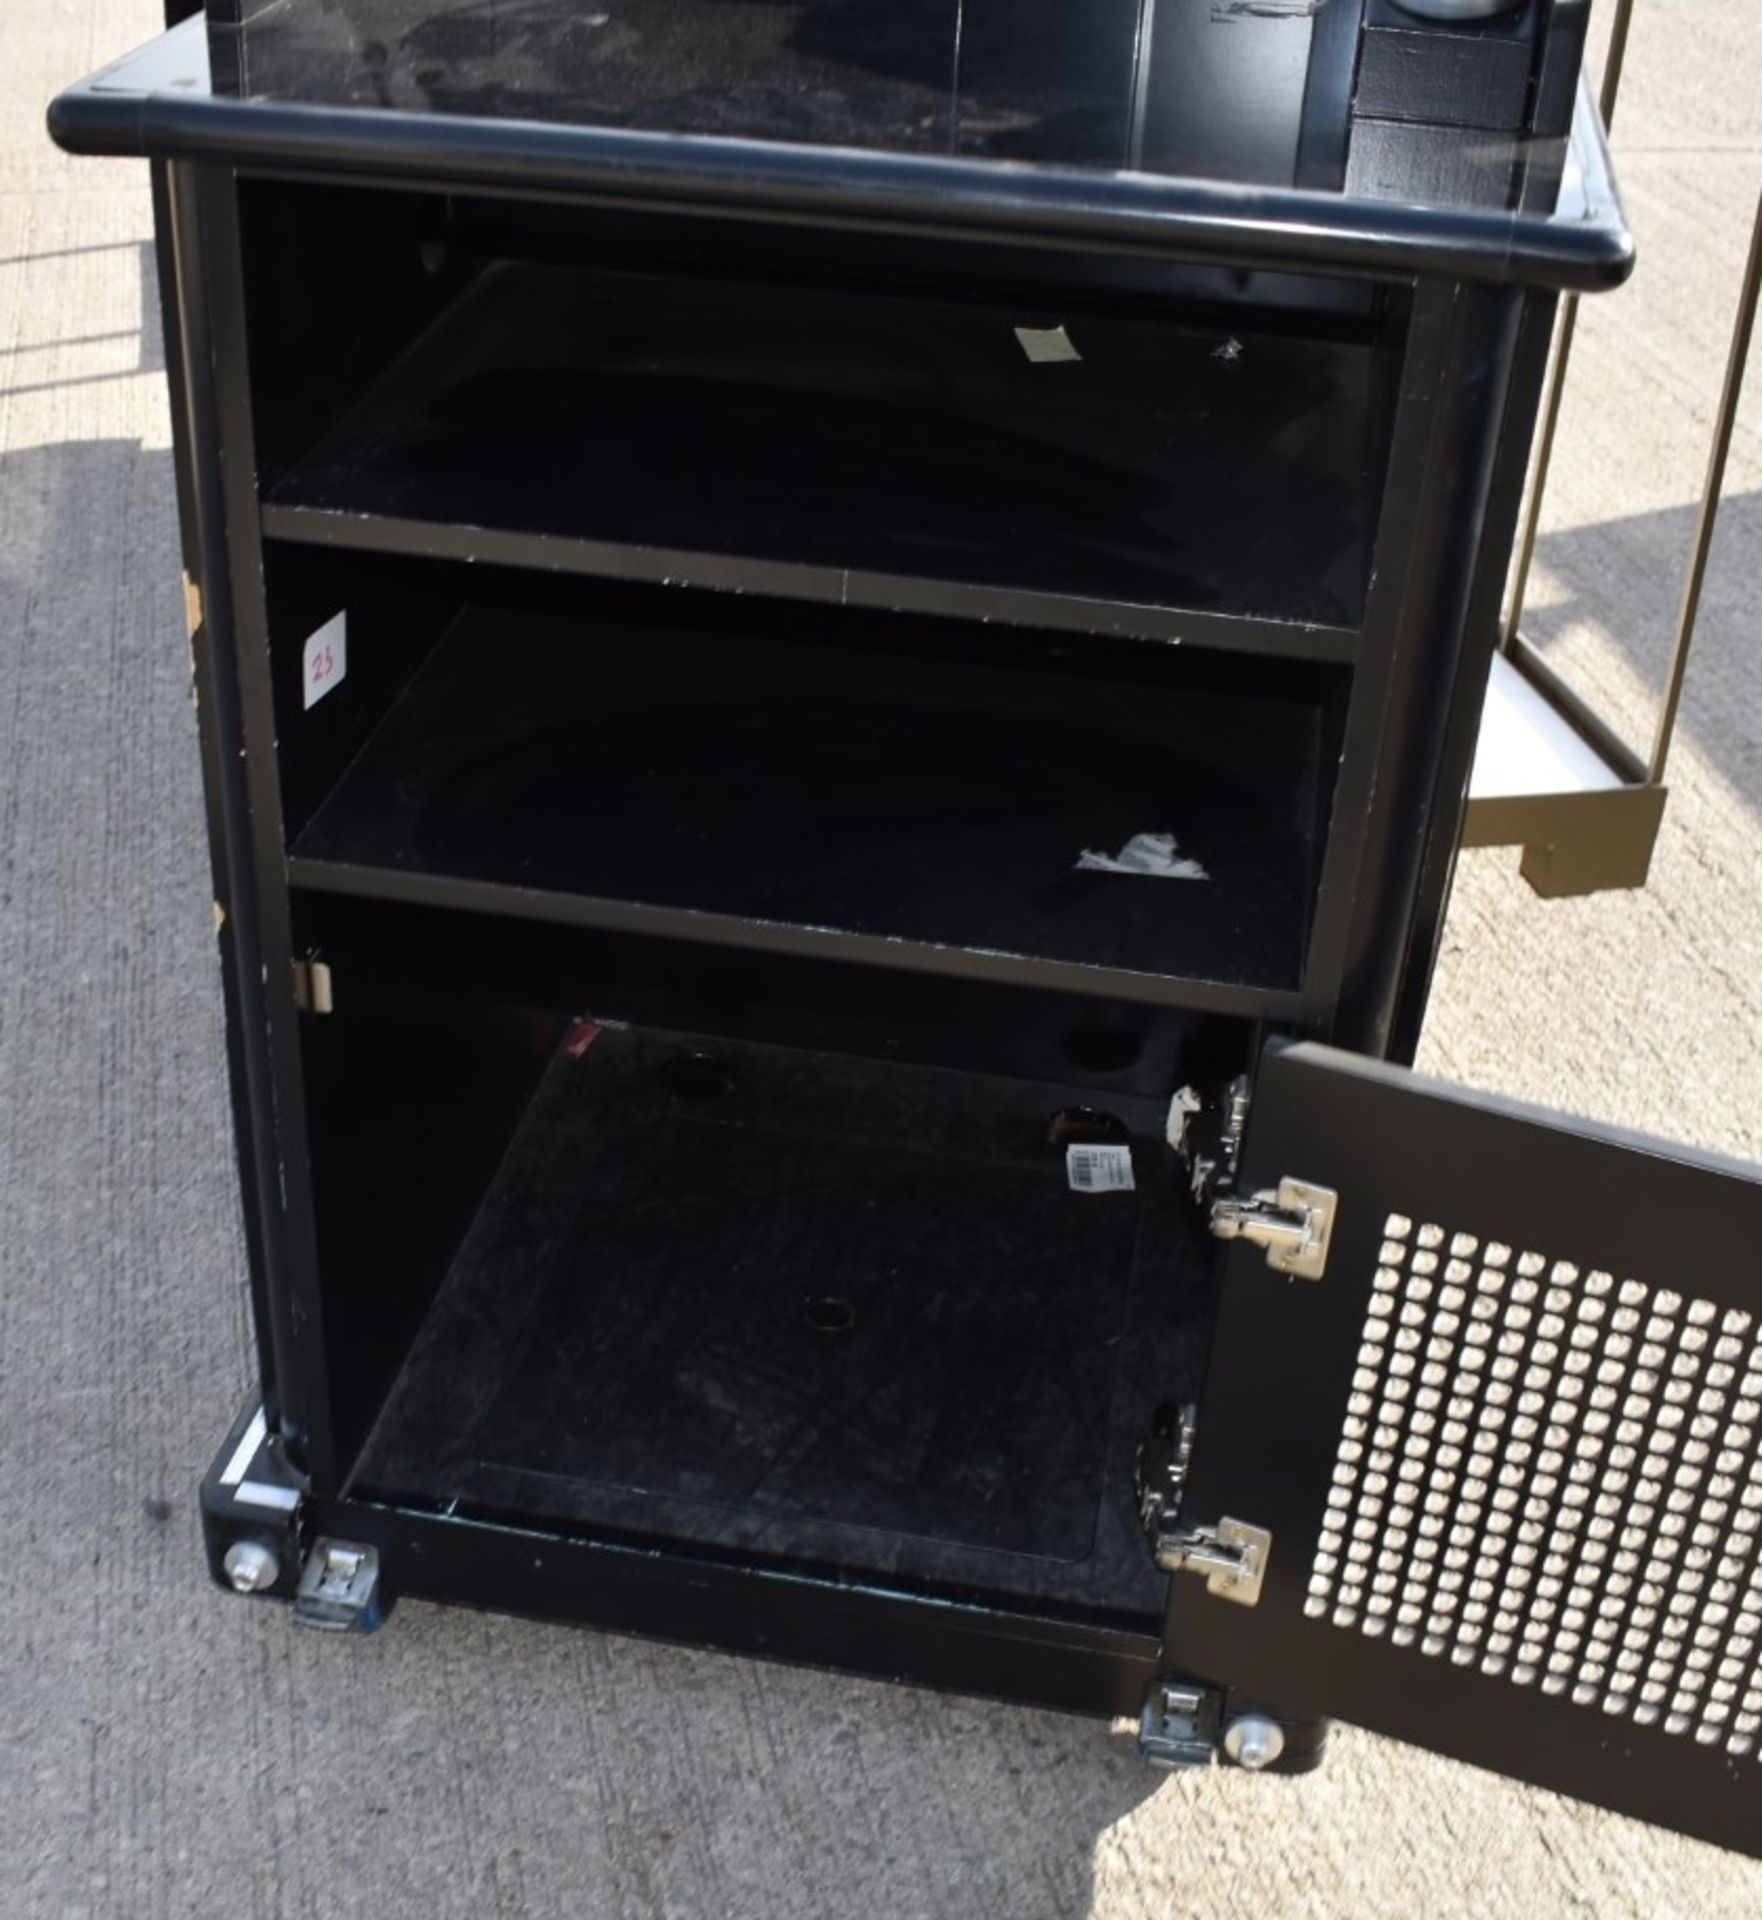 1 x Portable Mobile Sale Till Store Retail Counter Unit In Black, With Fold-out Sides - Image 3 of 4